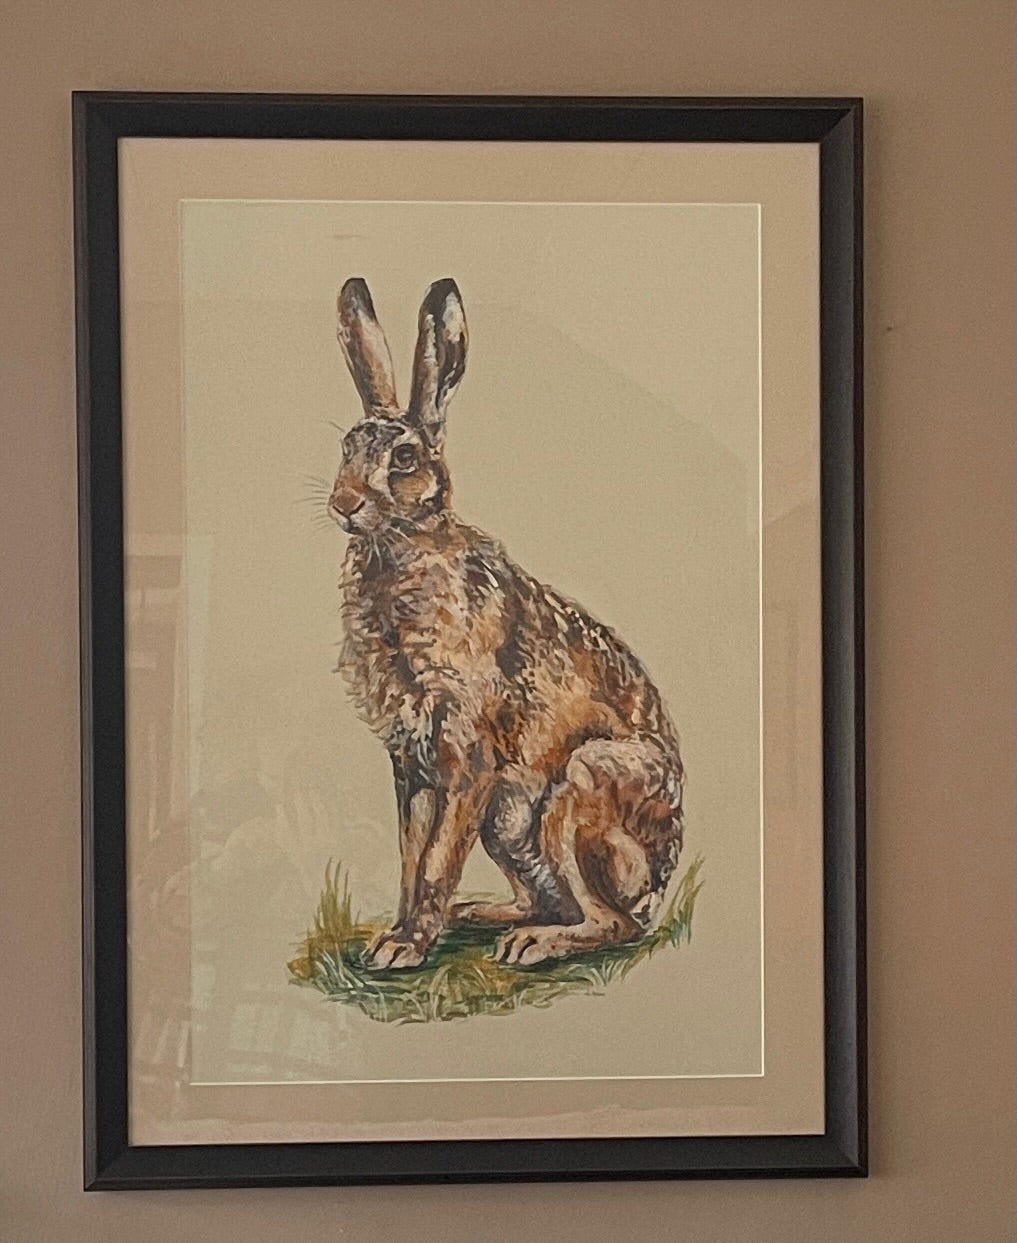 Hares are so athletic with their powerful hind legs ready to propel them off into the distance. There is something magical about catching a glimpse of a hare.  This painting has an off-white background.